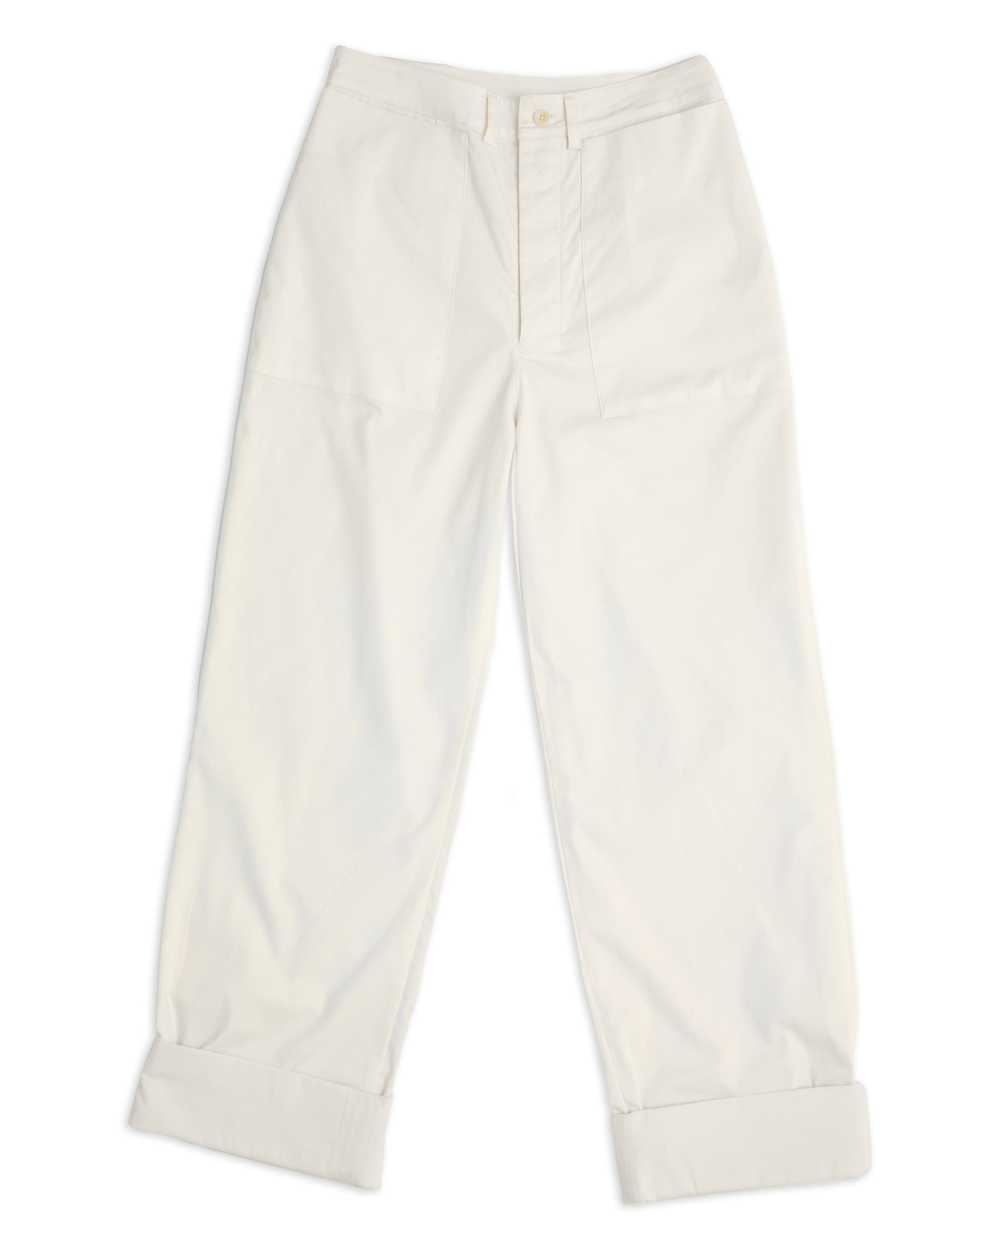 James Street Co. THE CUFF PANT - image 2